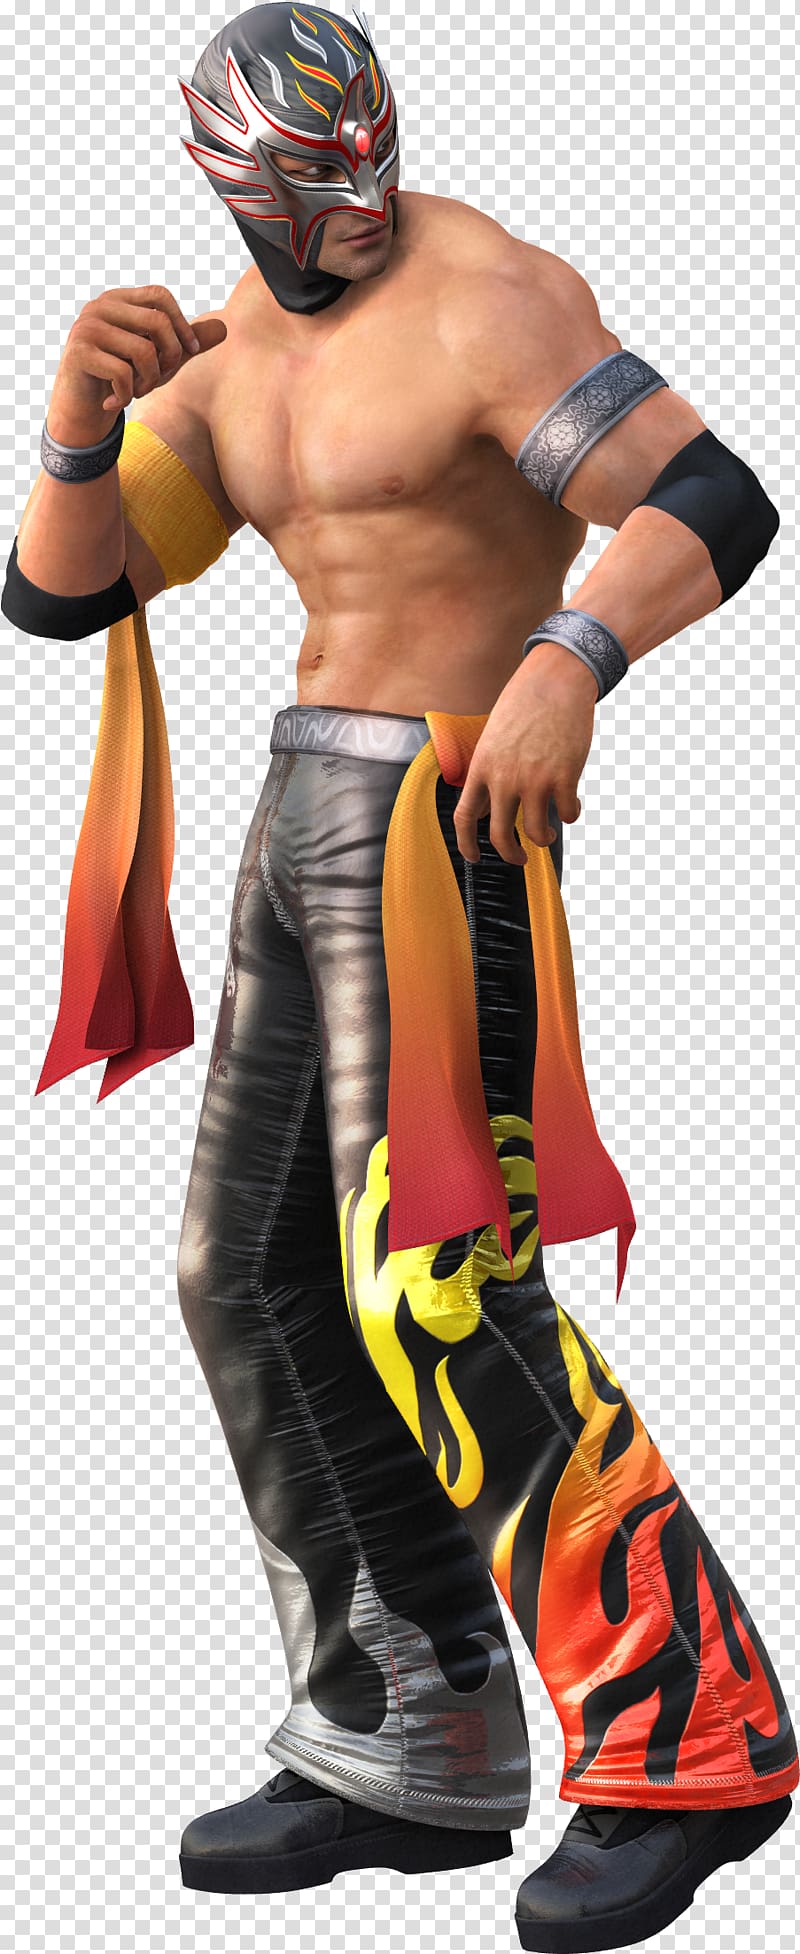 Virtua Fighter 5 Virtua Fighter 4 Video game Fighting game, blaze transparent background PNG clipart